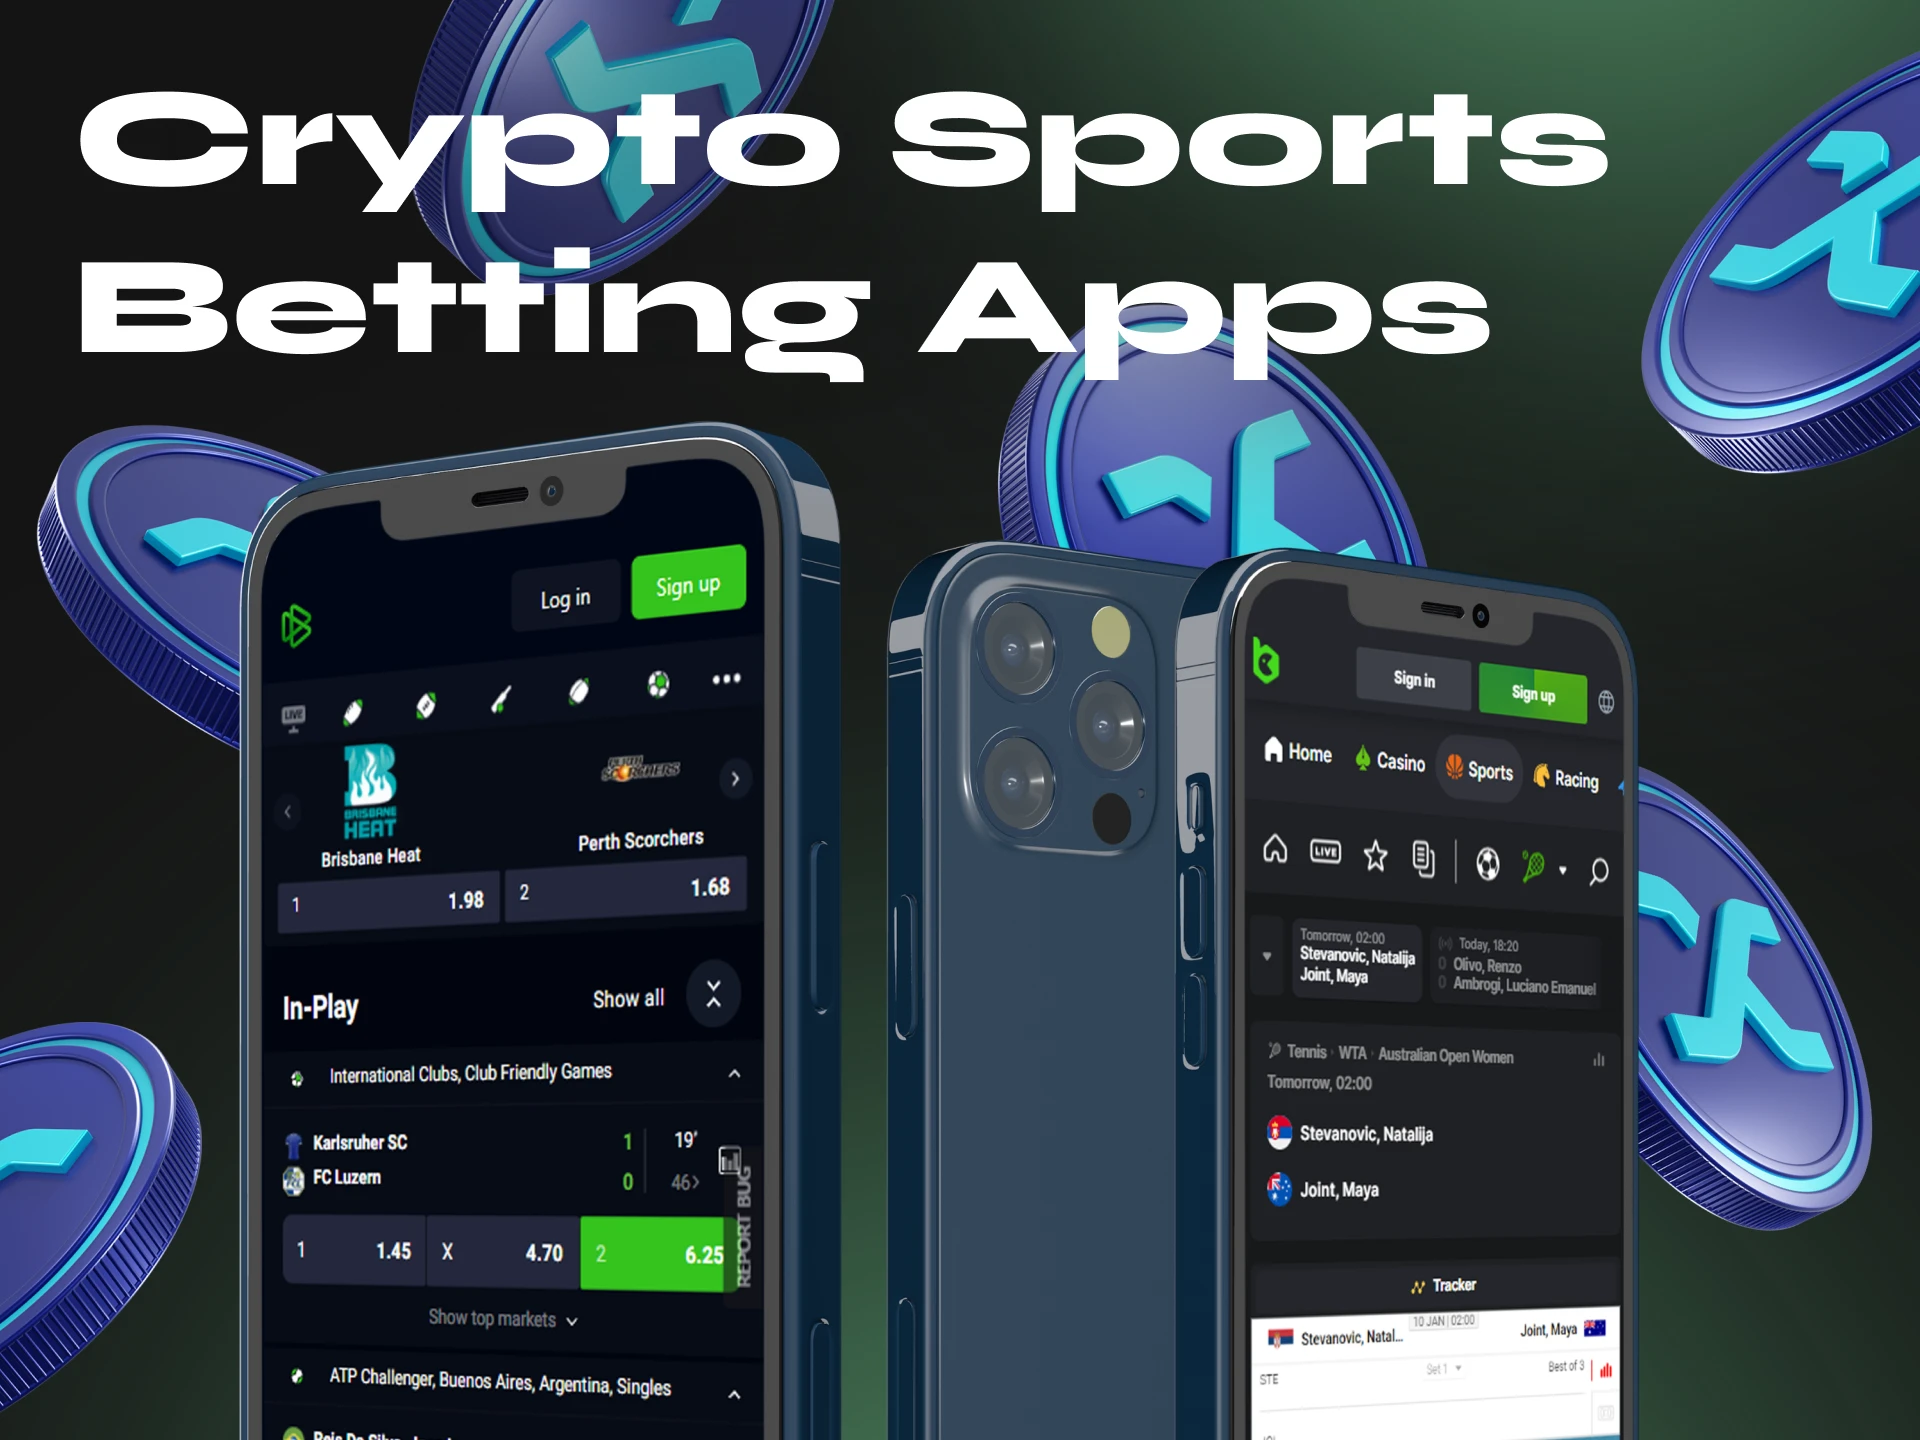 Place sports bets using cryptocurrency anywhere using mobile app.